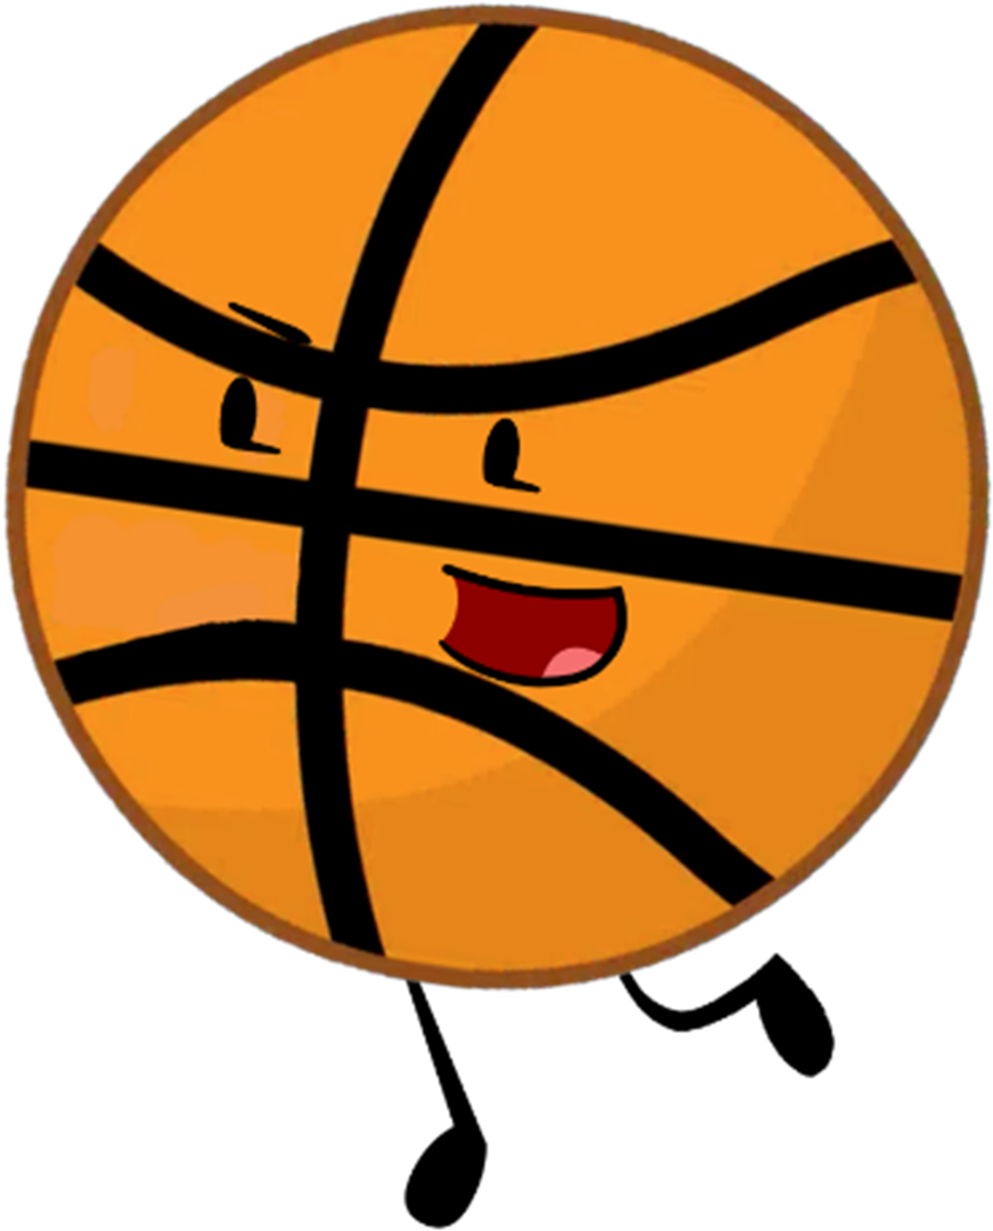 Bfdi - Object Shows Basketball (1000x1238)